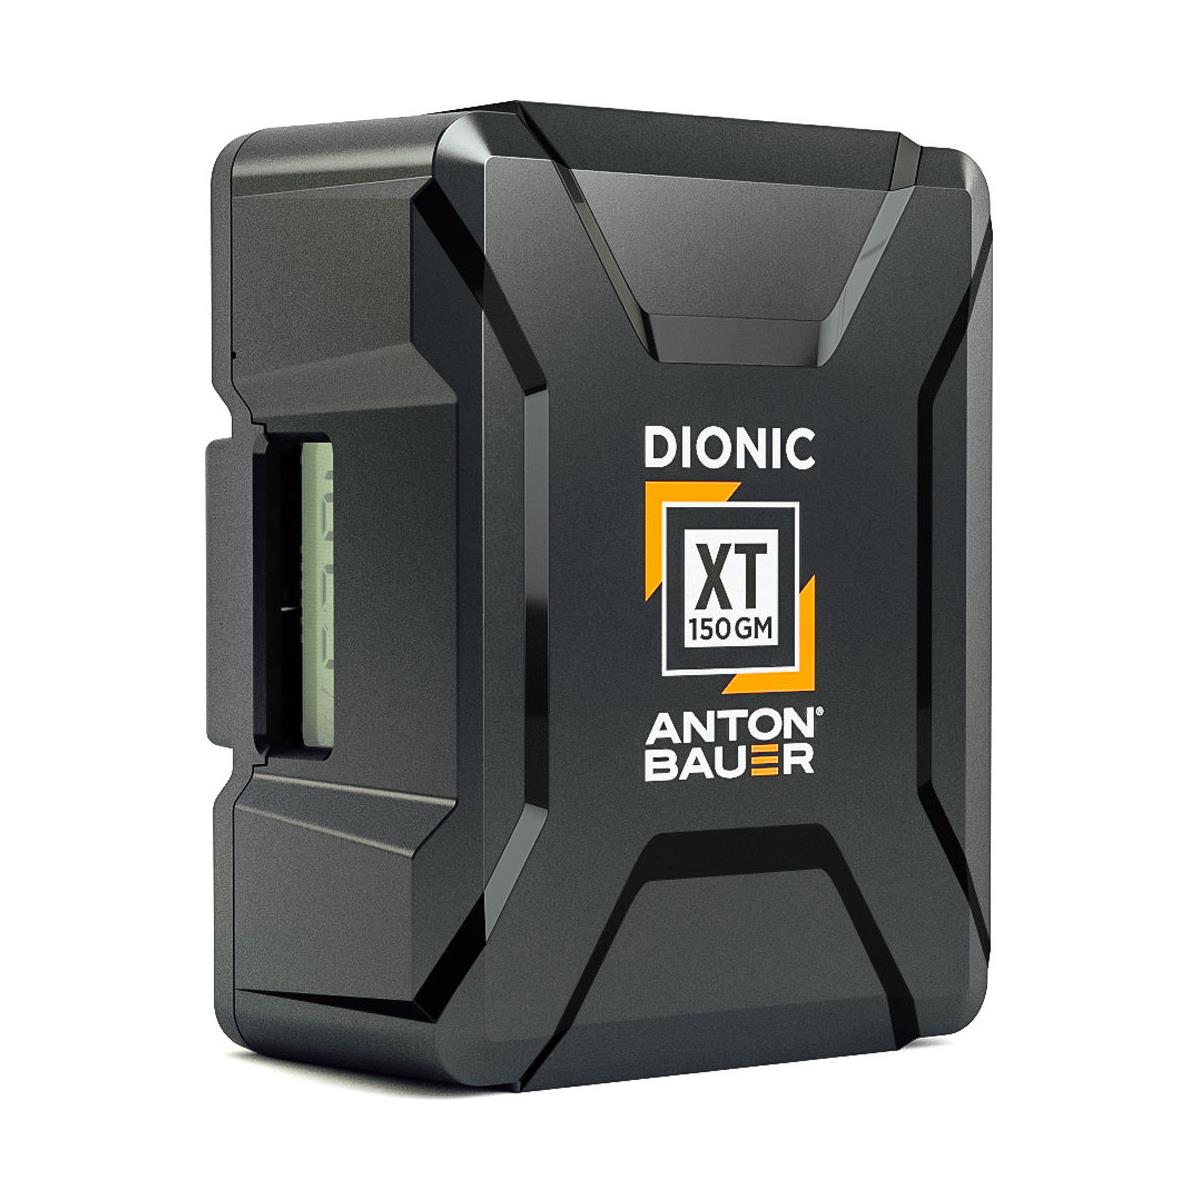 Image of Anton Bauer Dionic XT150 156Wh Gold Mount Lithium-Ion Battery